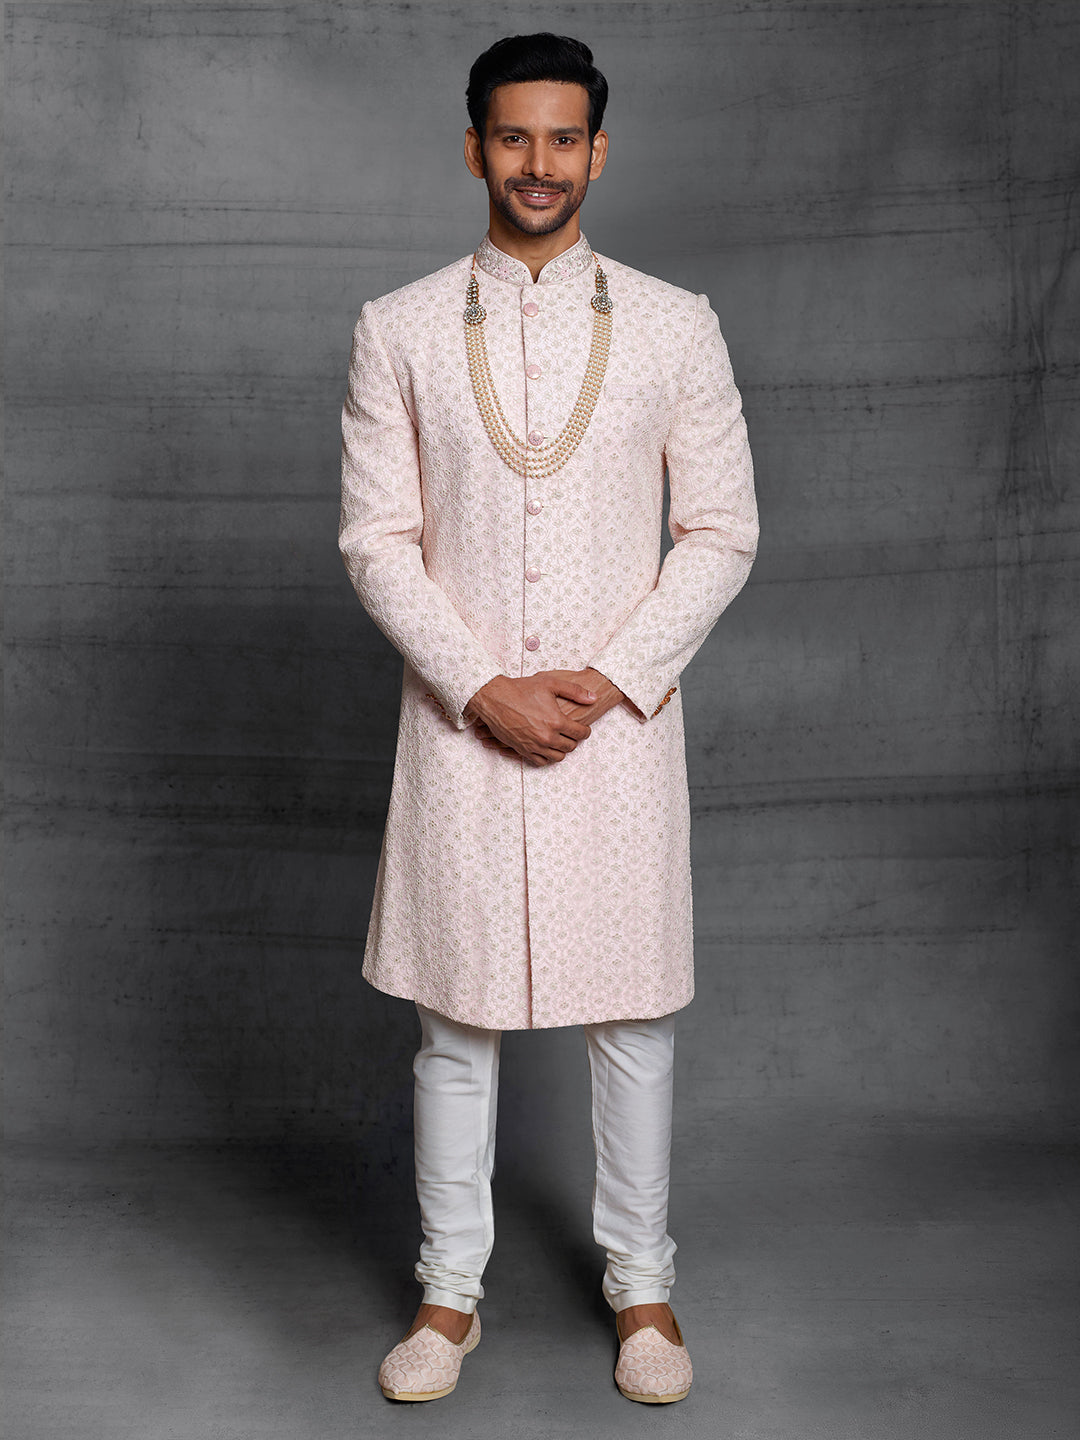 Sherwani in net based fabric in pink color